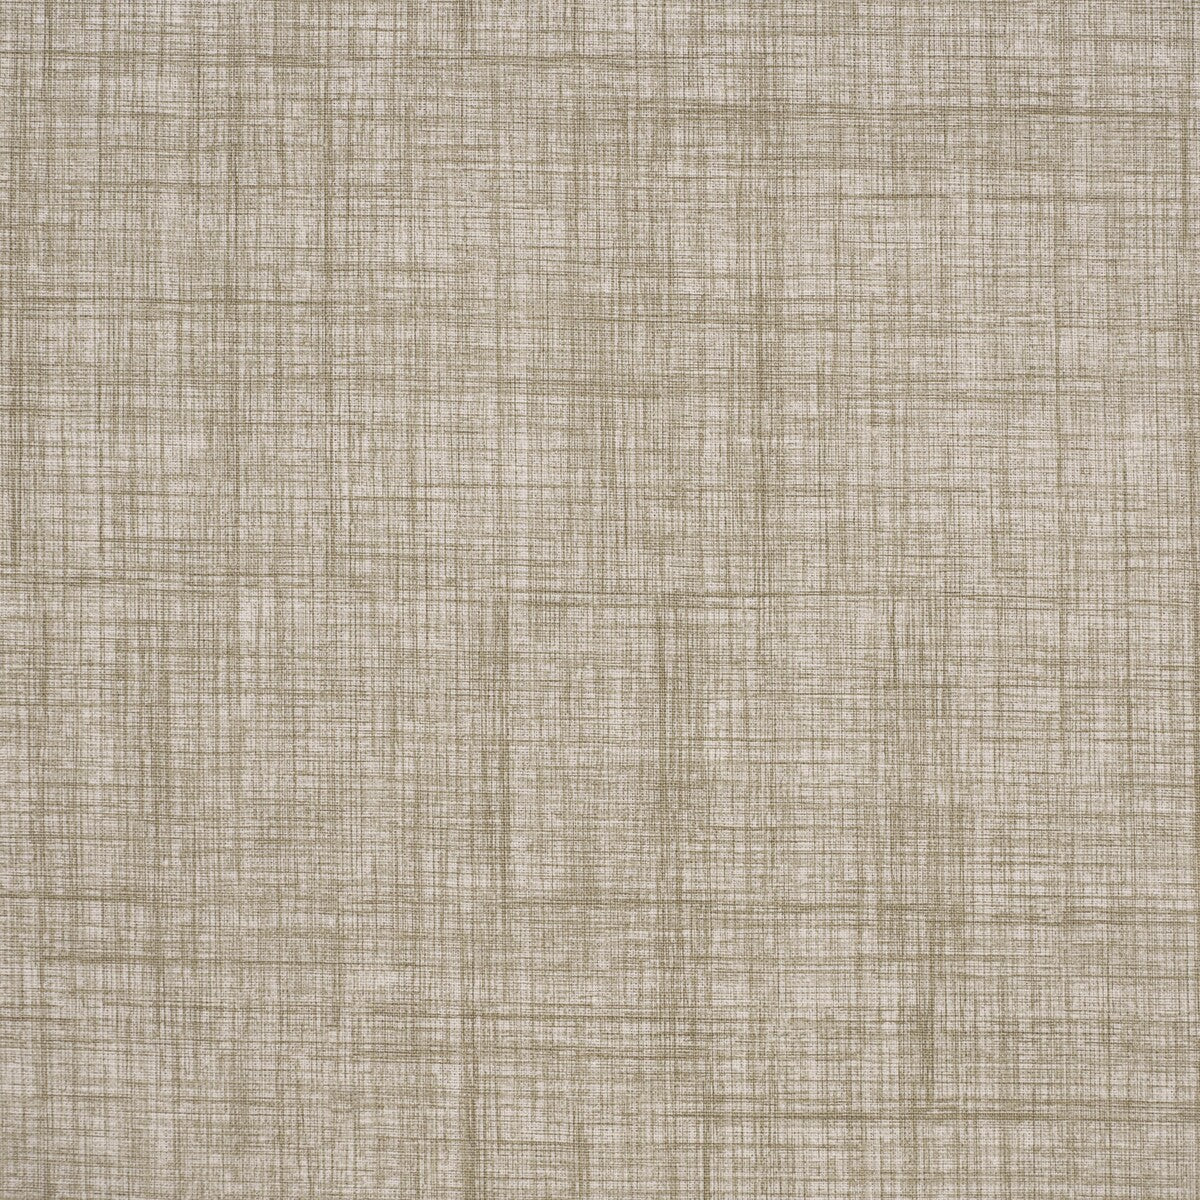 Hampton fabric in stone color - pattern BFC-3667.106.0 - by Lee Jofa in the Blithfield collection